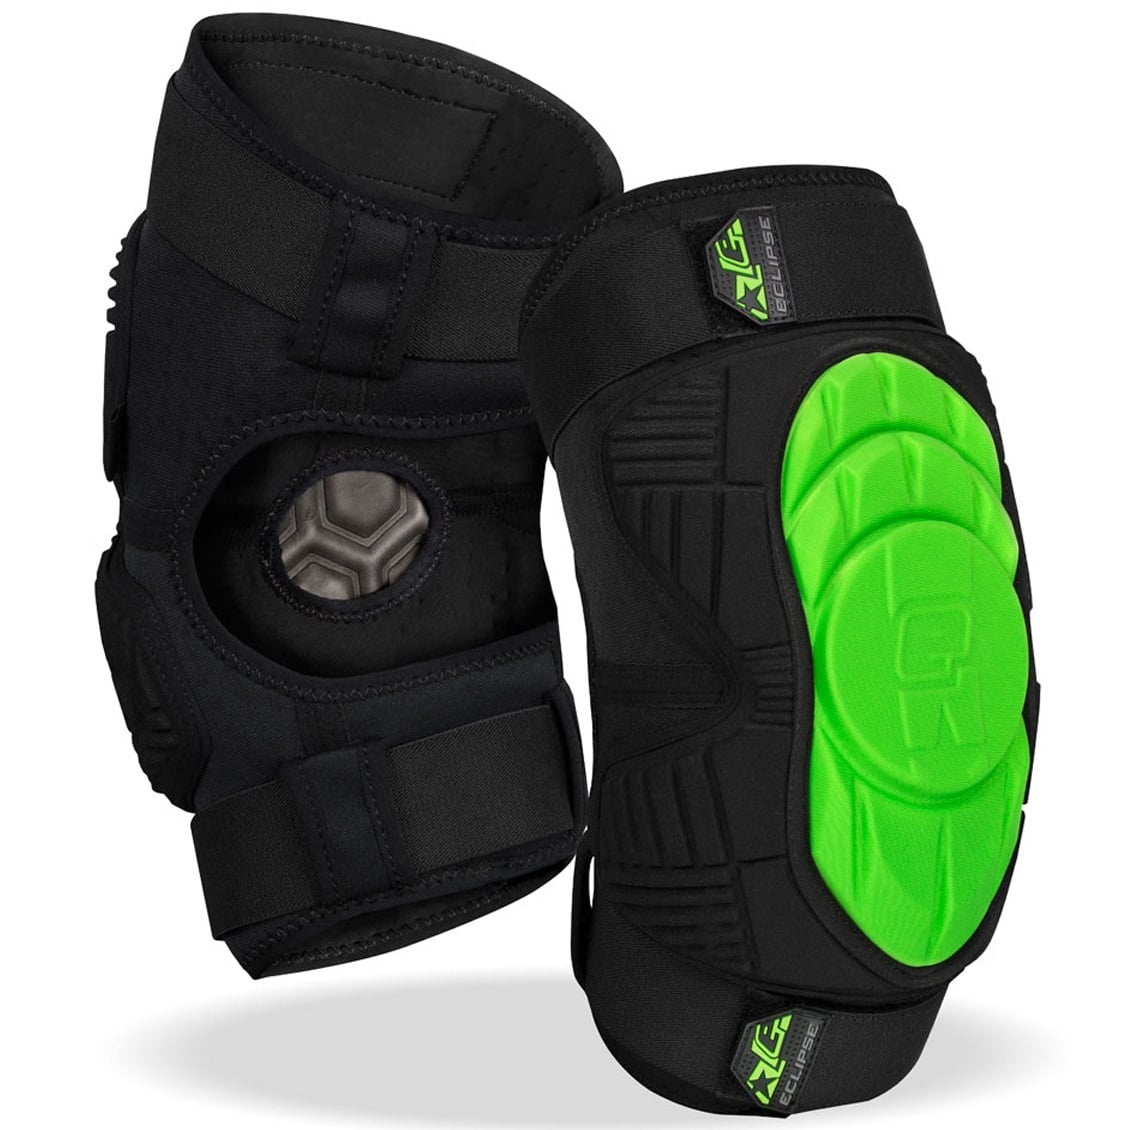 Planet Eclipse Paintball Knee Pads